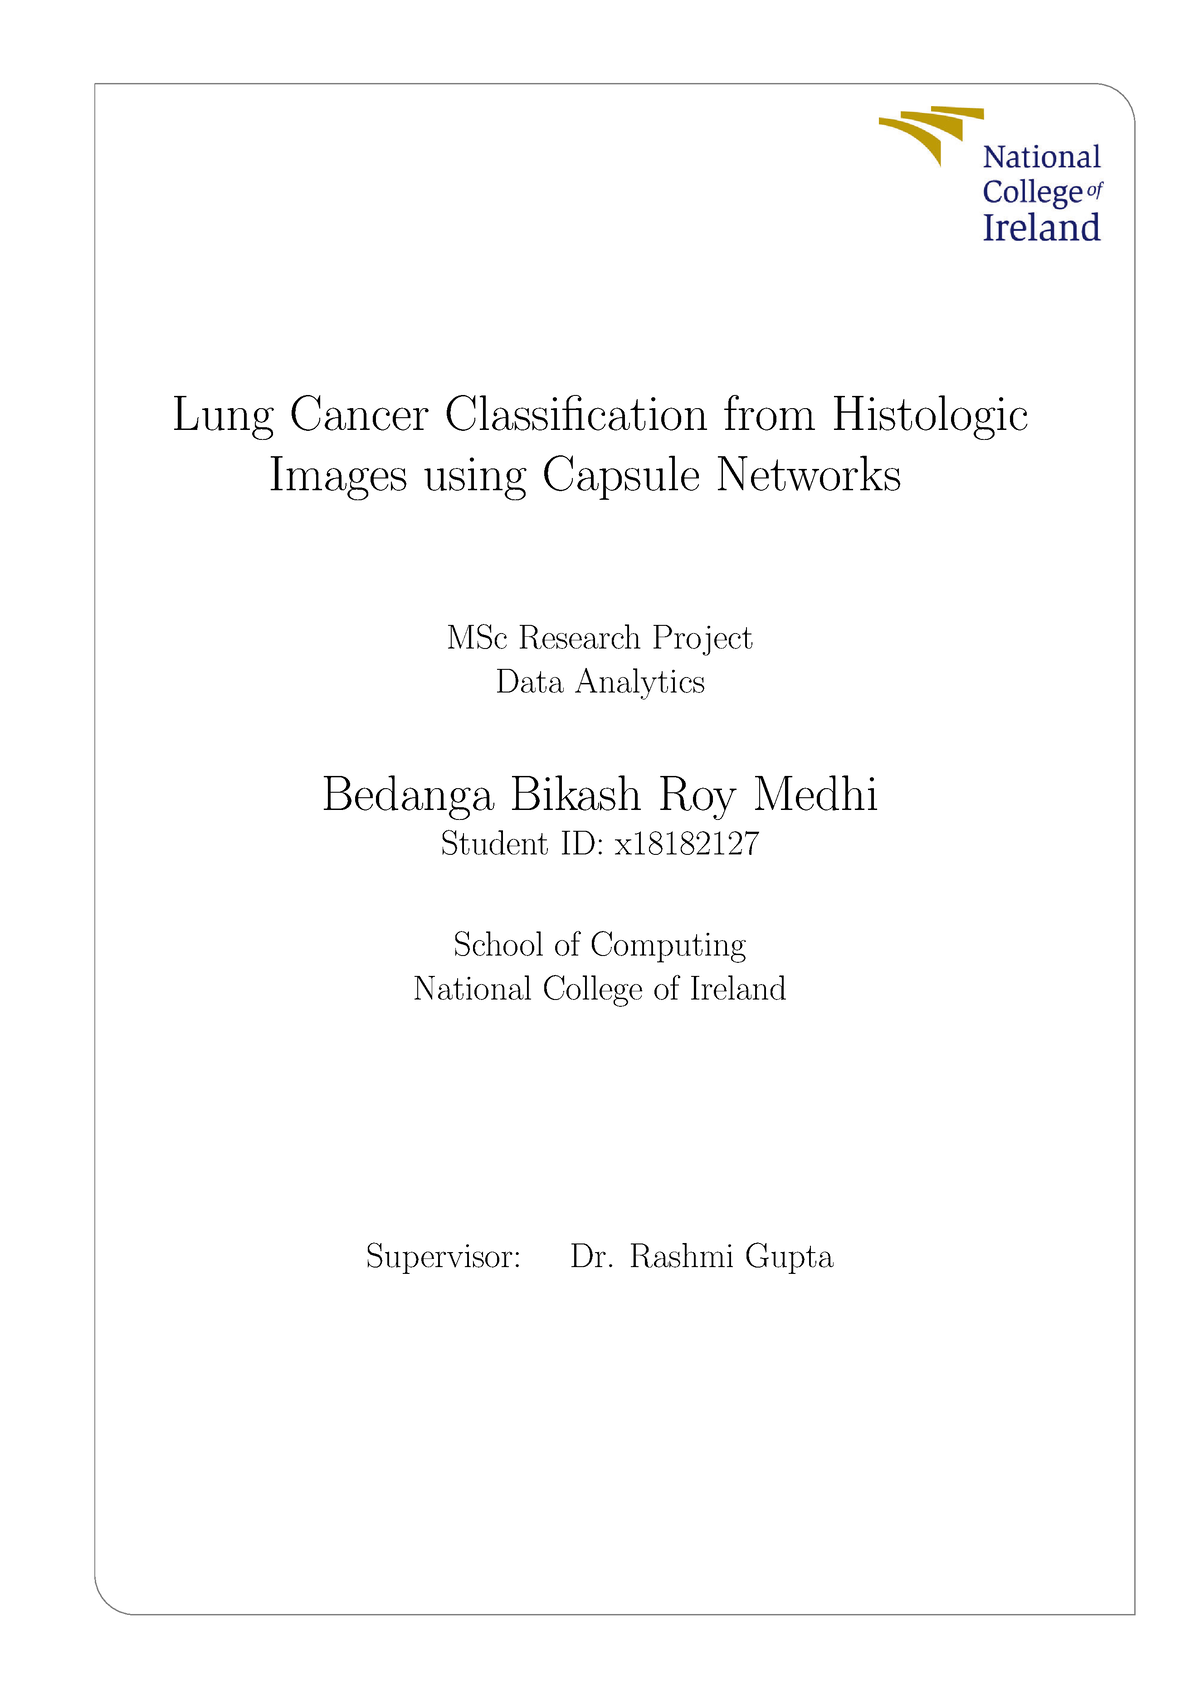 phd thesis in lung cancer